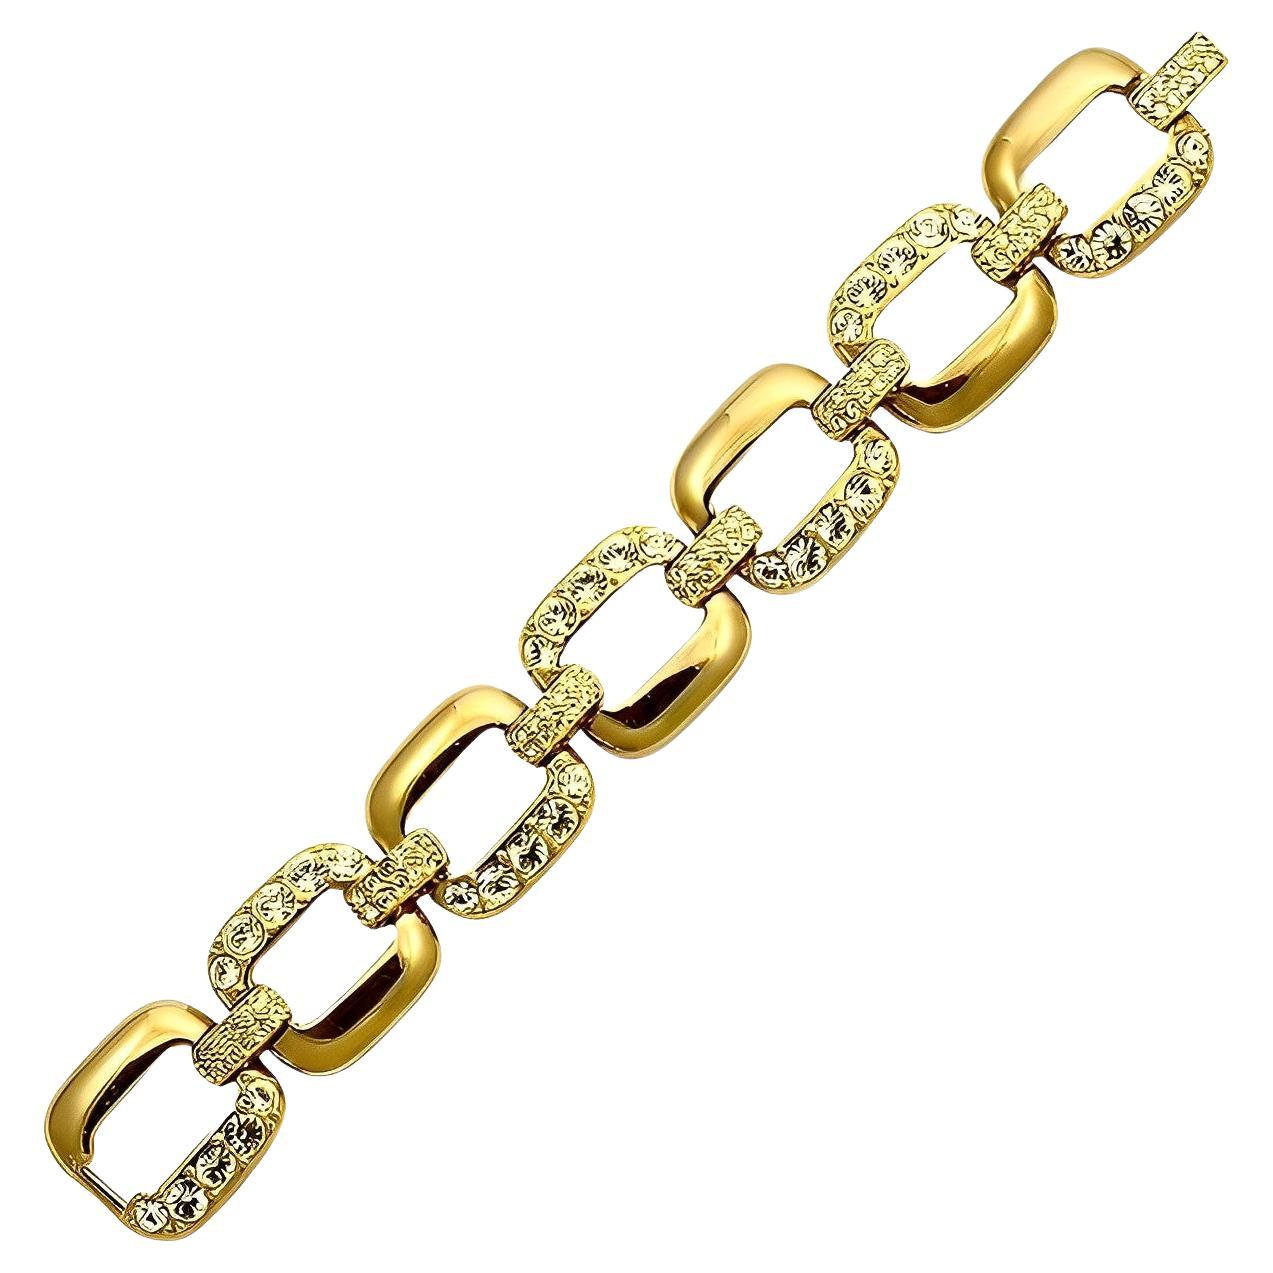 Gold Plated Wide Link Statement Bracelet with Crystals circa 1980s For Sale